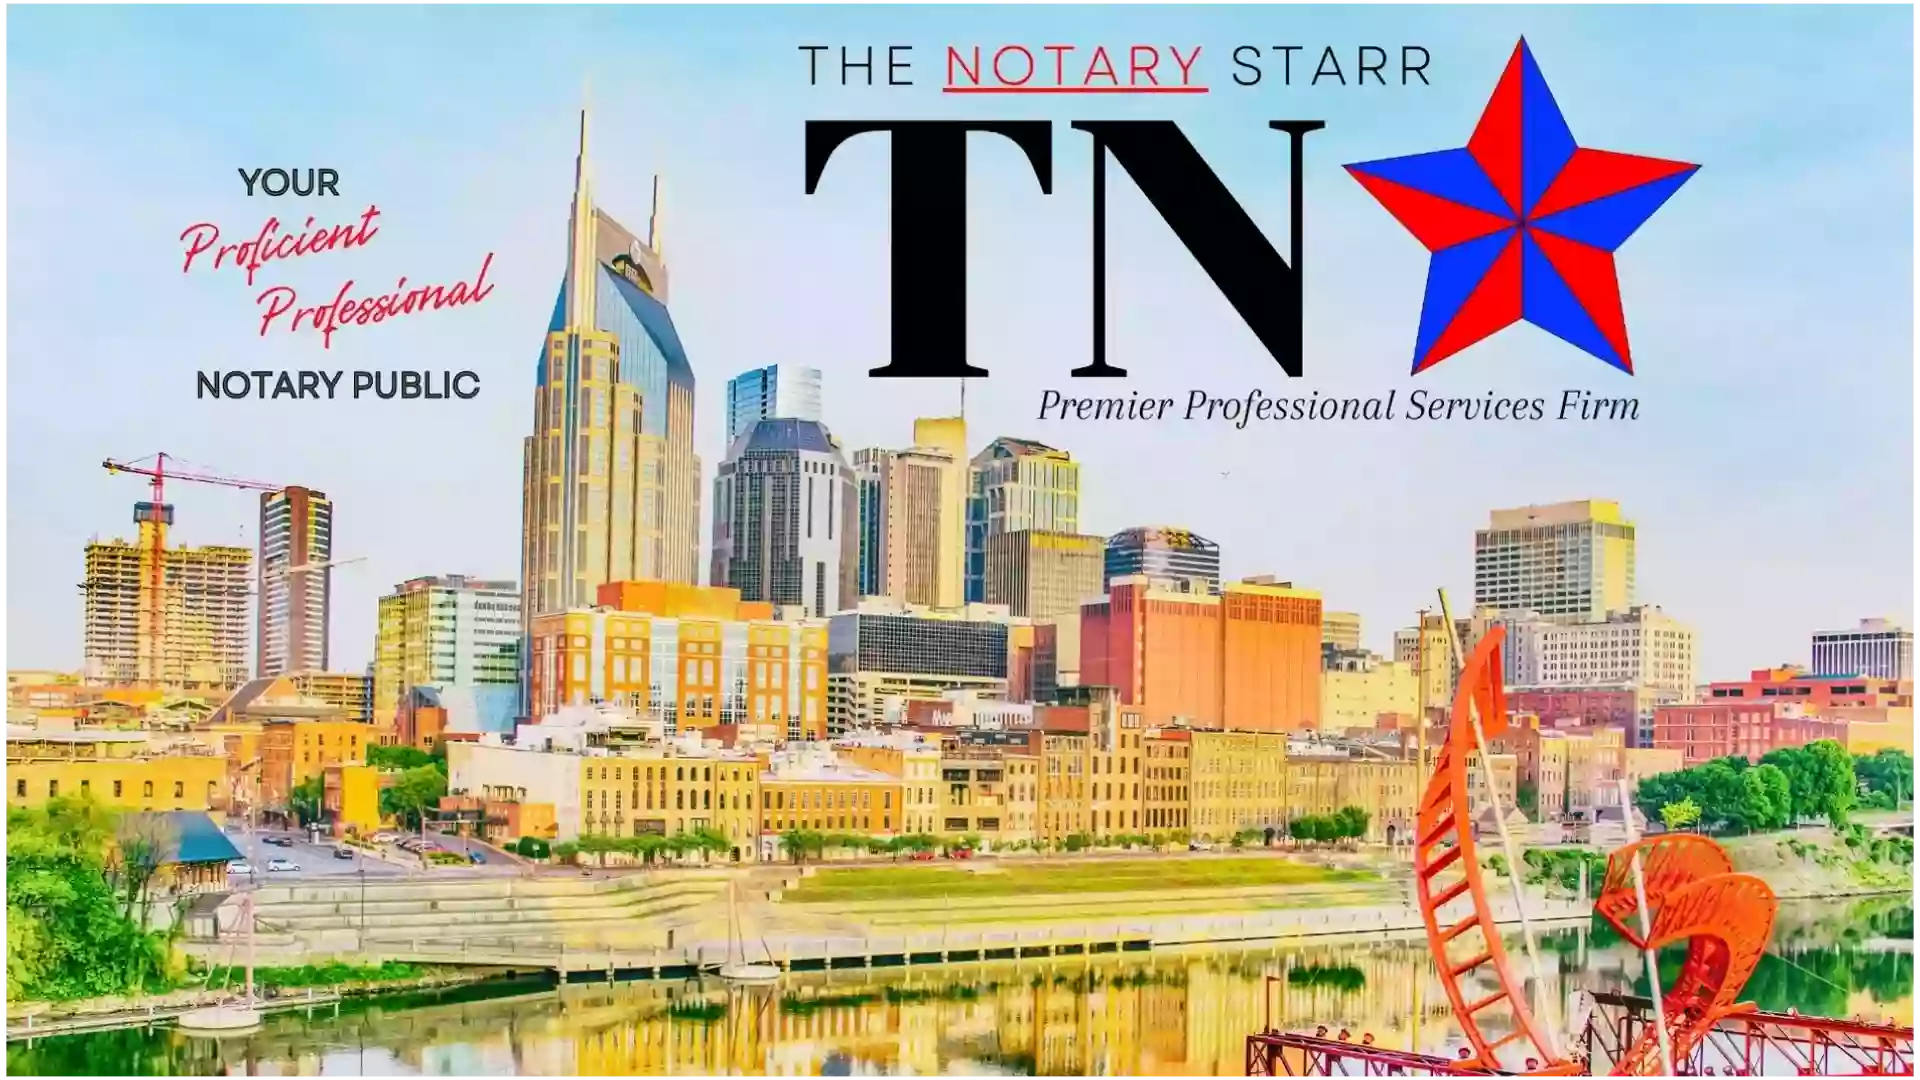 THE NOTARY STARR, LLC - Nashville Notary | Online Notary | Apostille | Loan Signing | IPEN | Fingerprinting | Marriage Forms